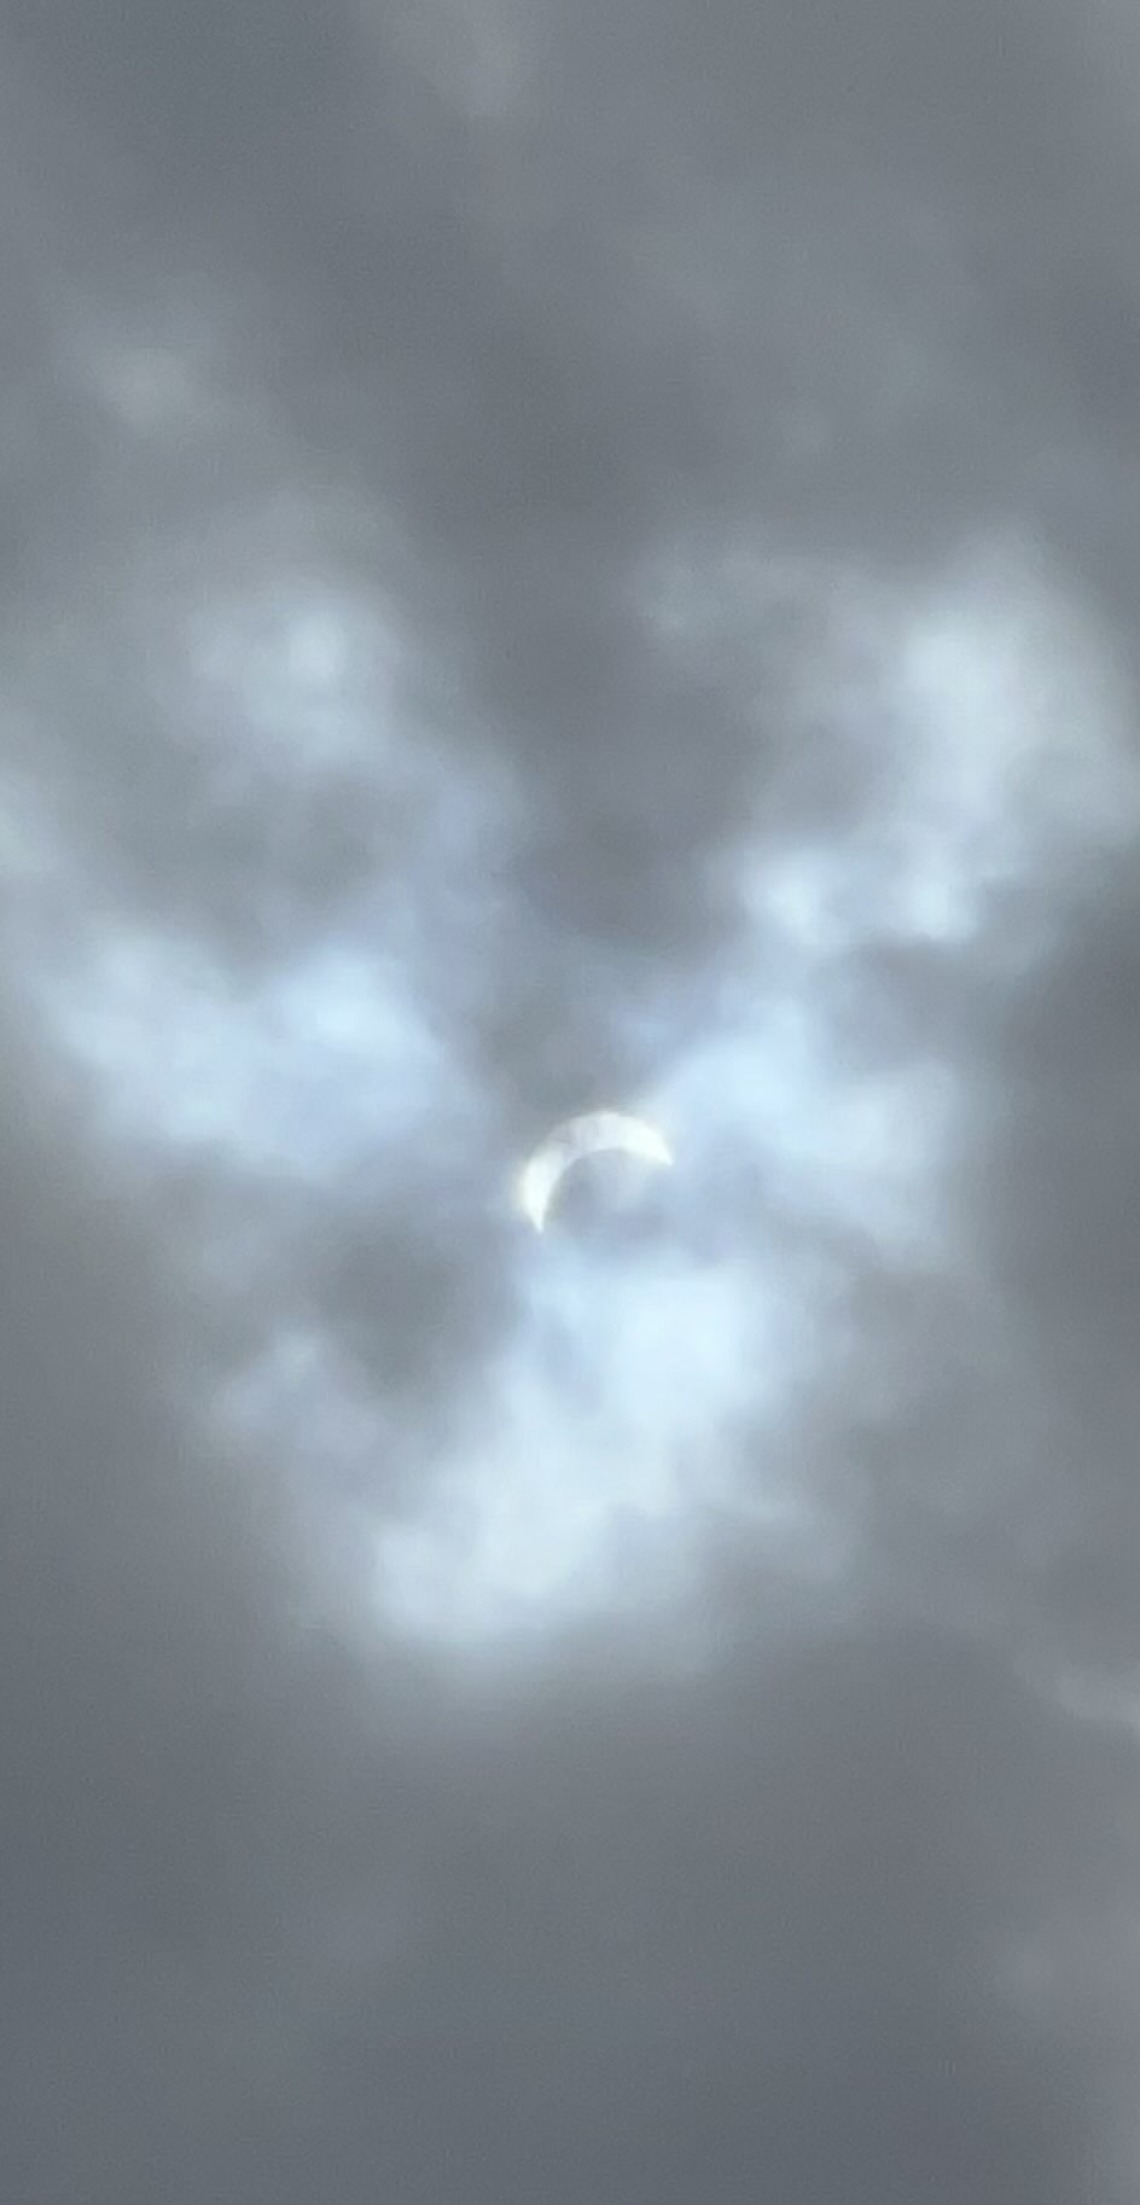 Jannick Rolland-Thompson's view of the solar eclipse in Seneca Falls, NY, Cayuga Lake.